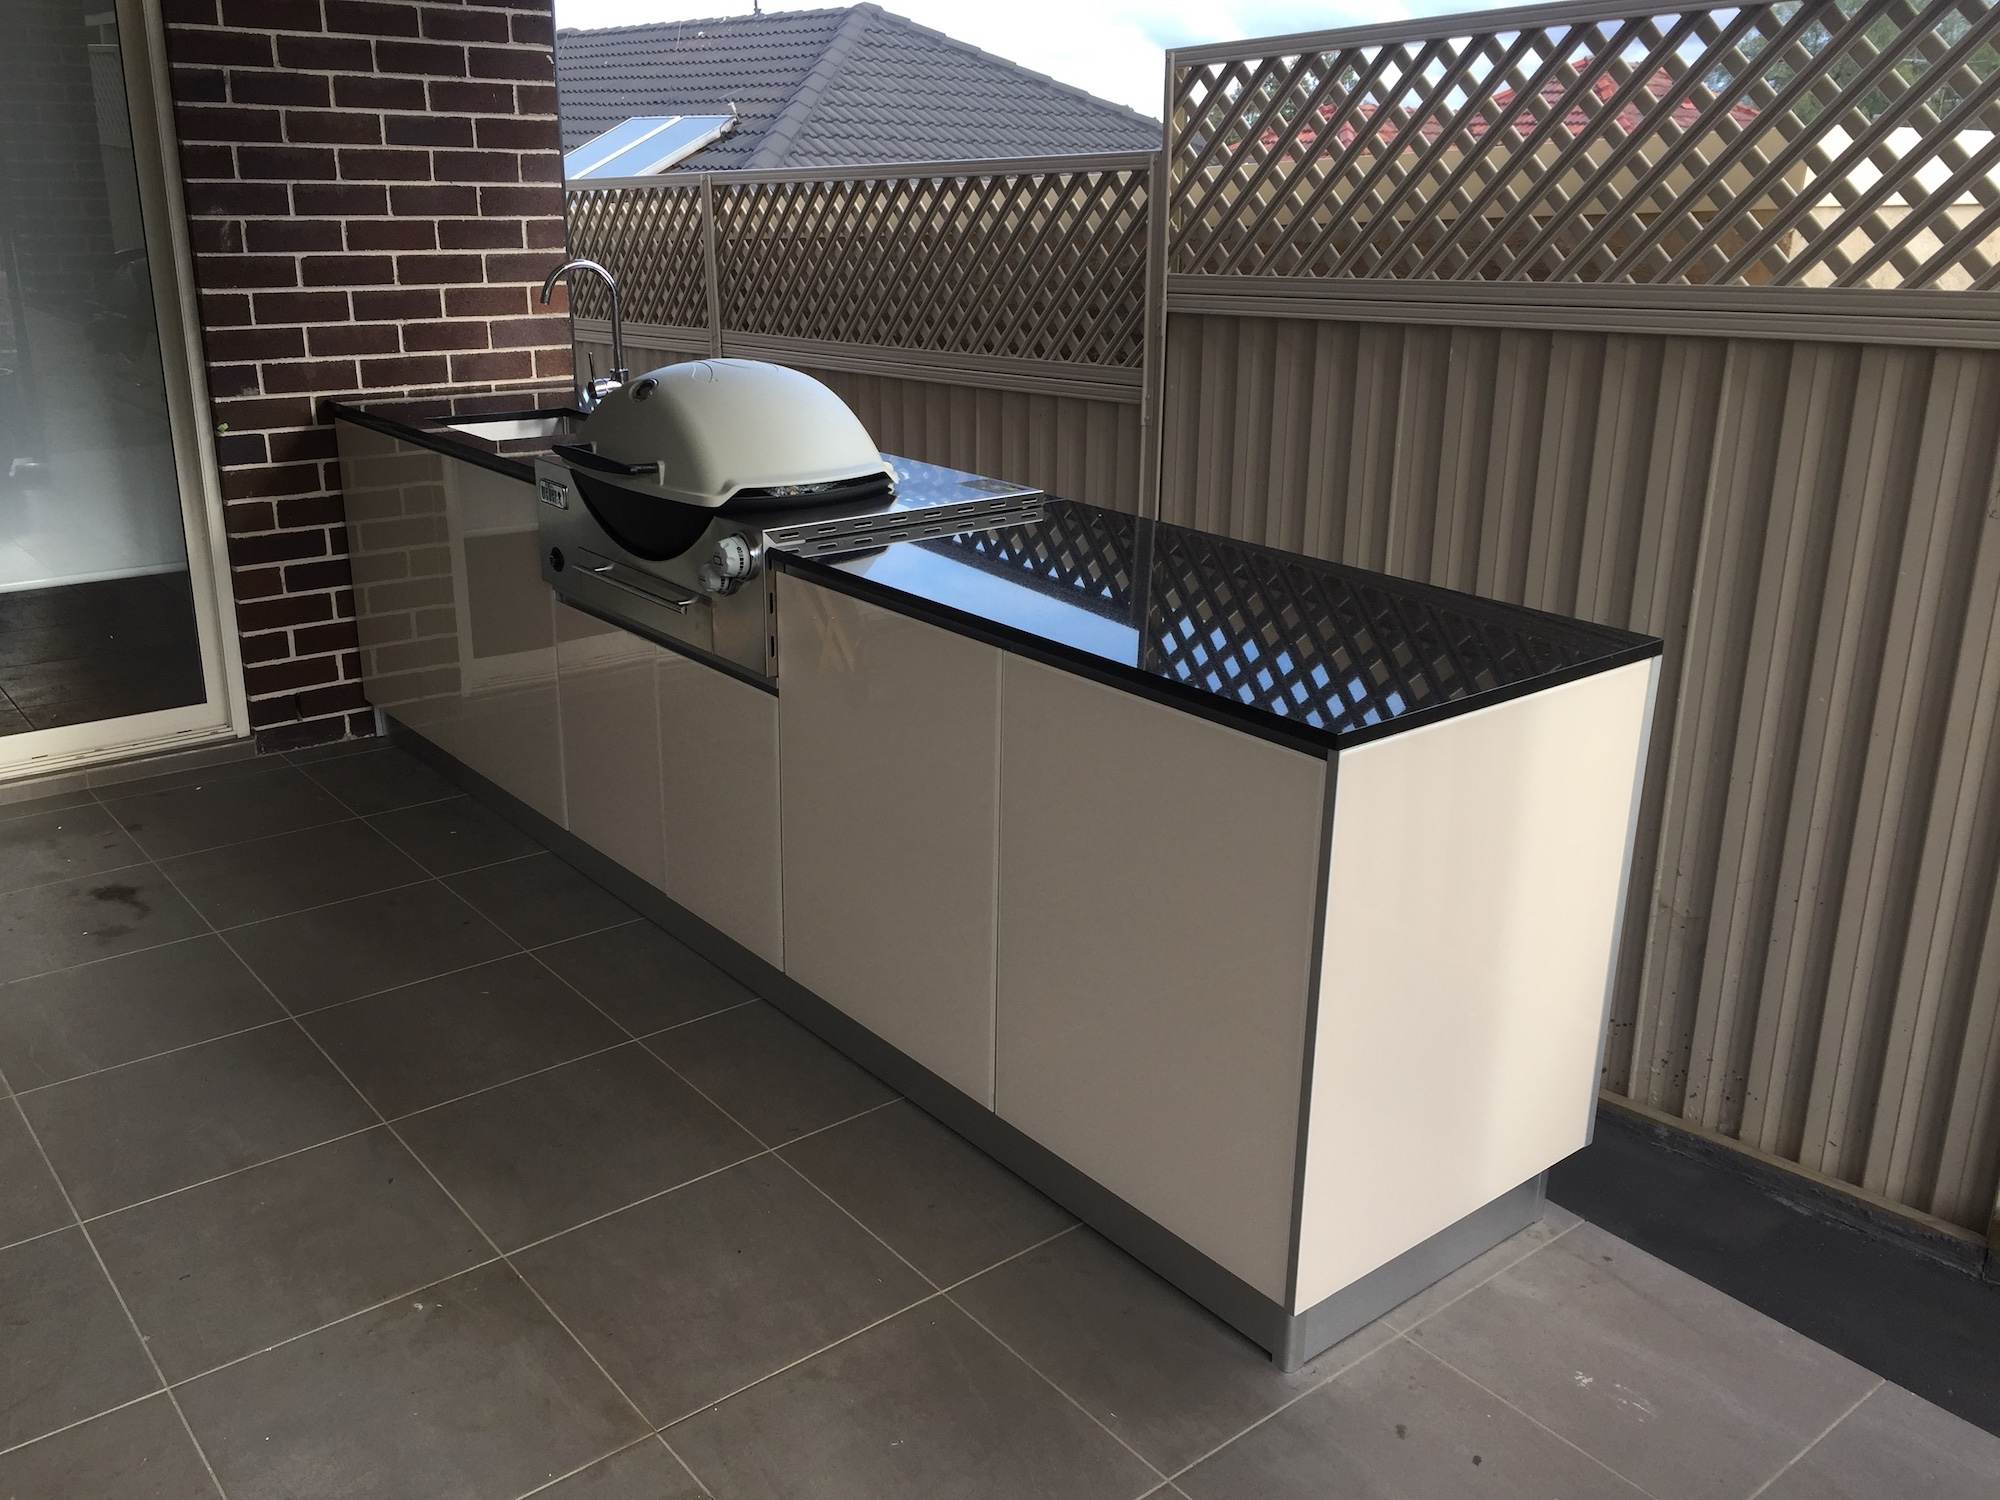 Buy Outdoor Kitchens And Cabinets Beefeater Bbqs And More